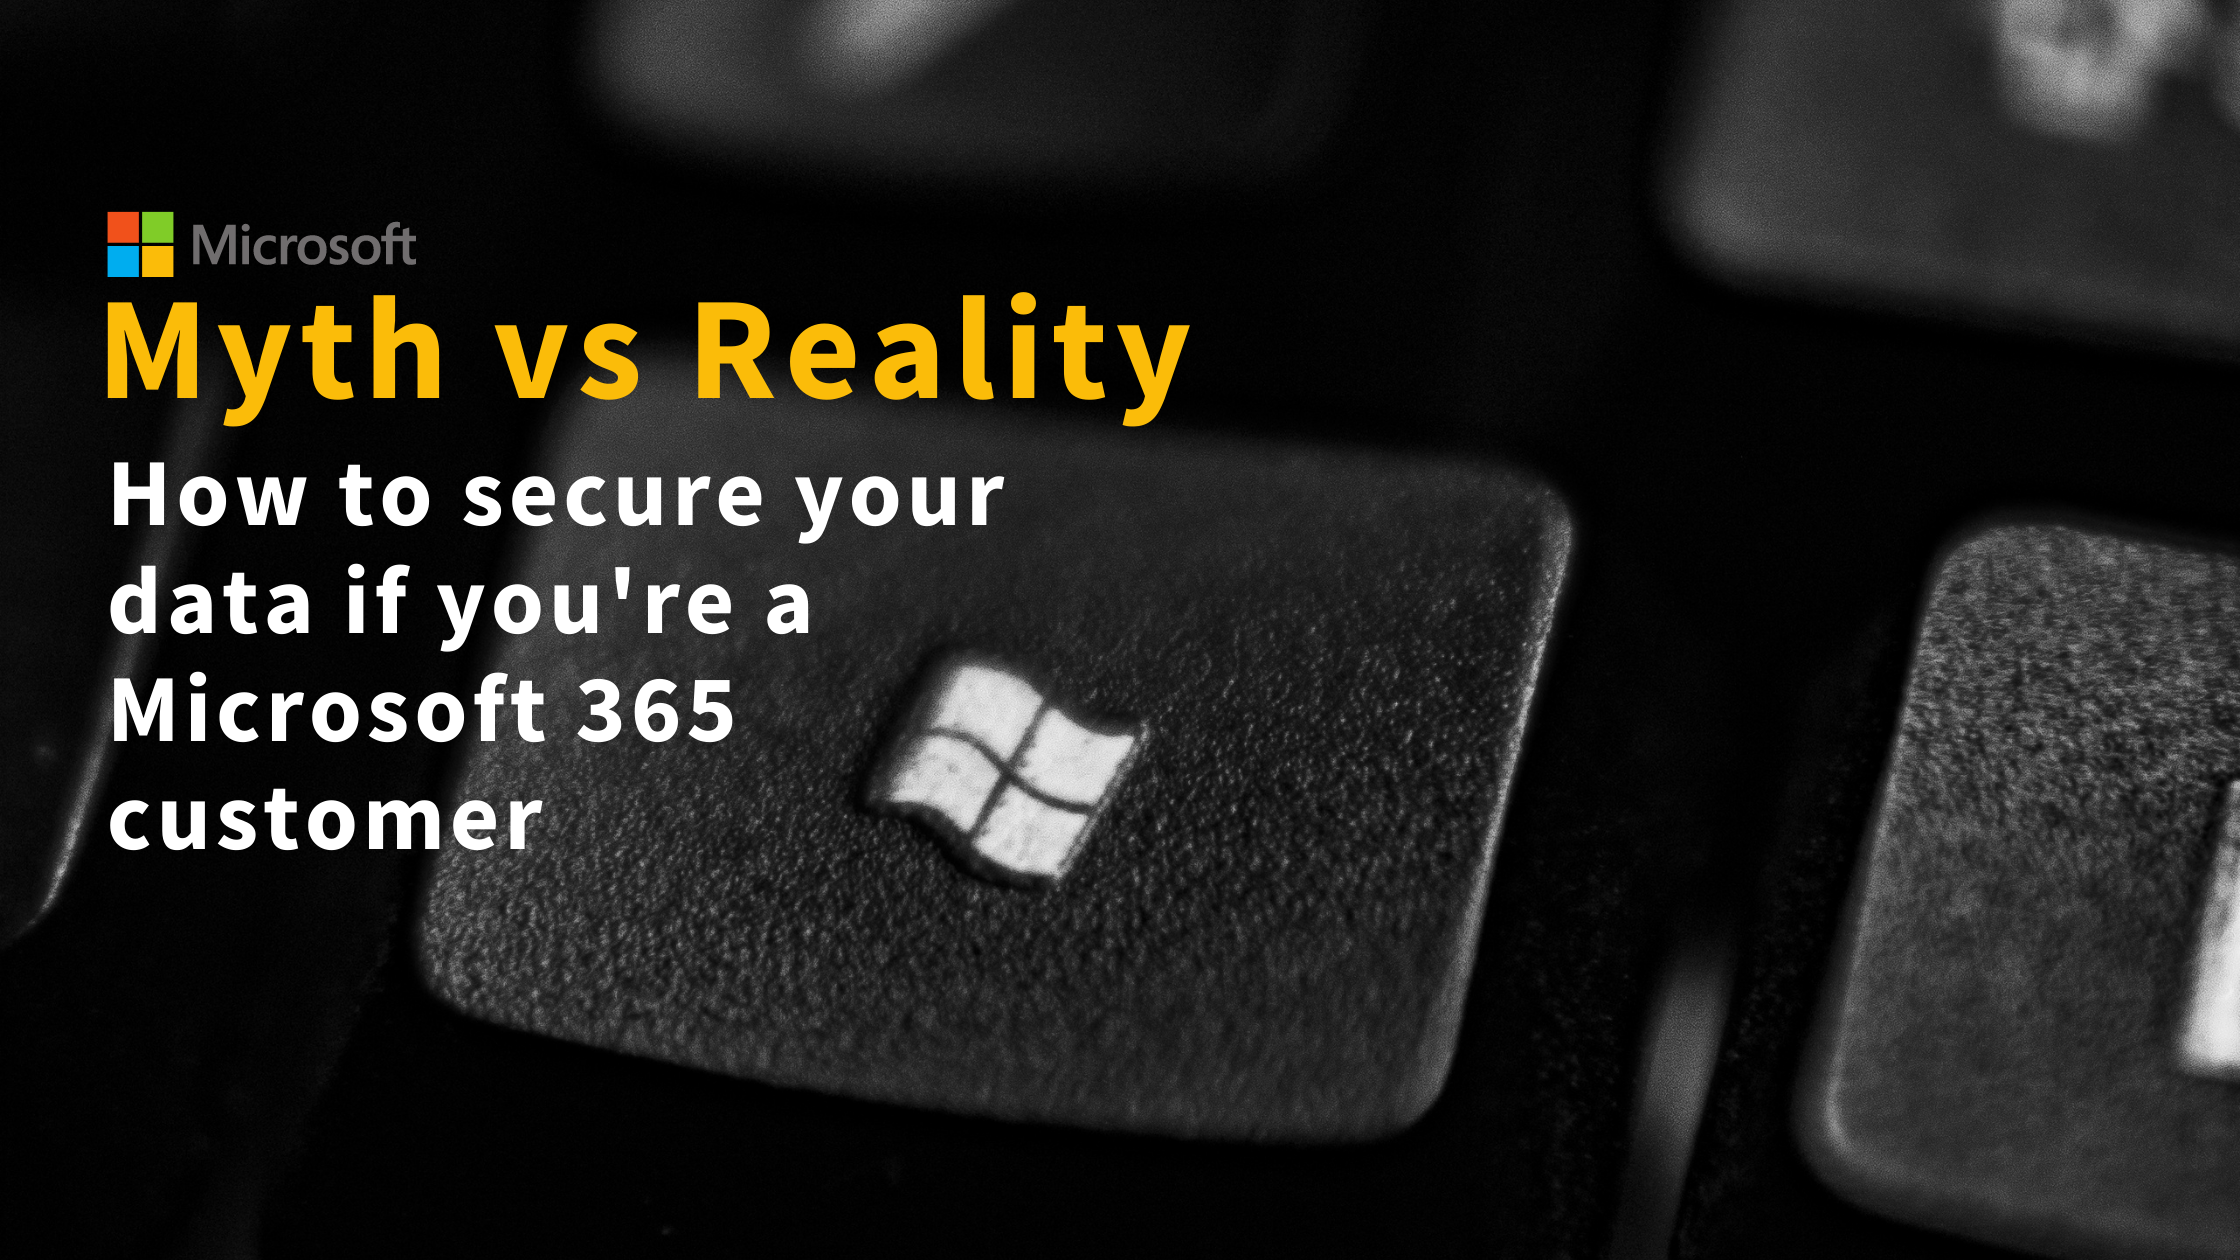 Microsoft 365 isn’t responsible for your data – here’s how to secure and recover it